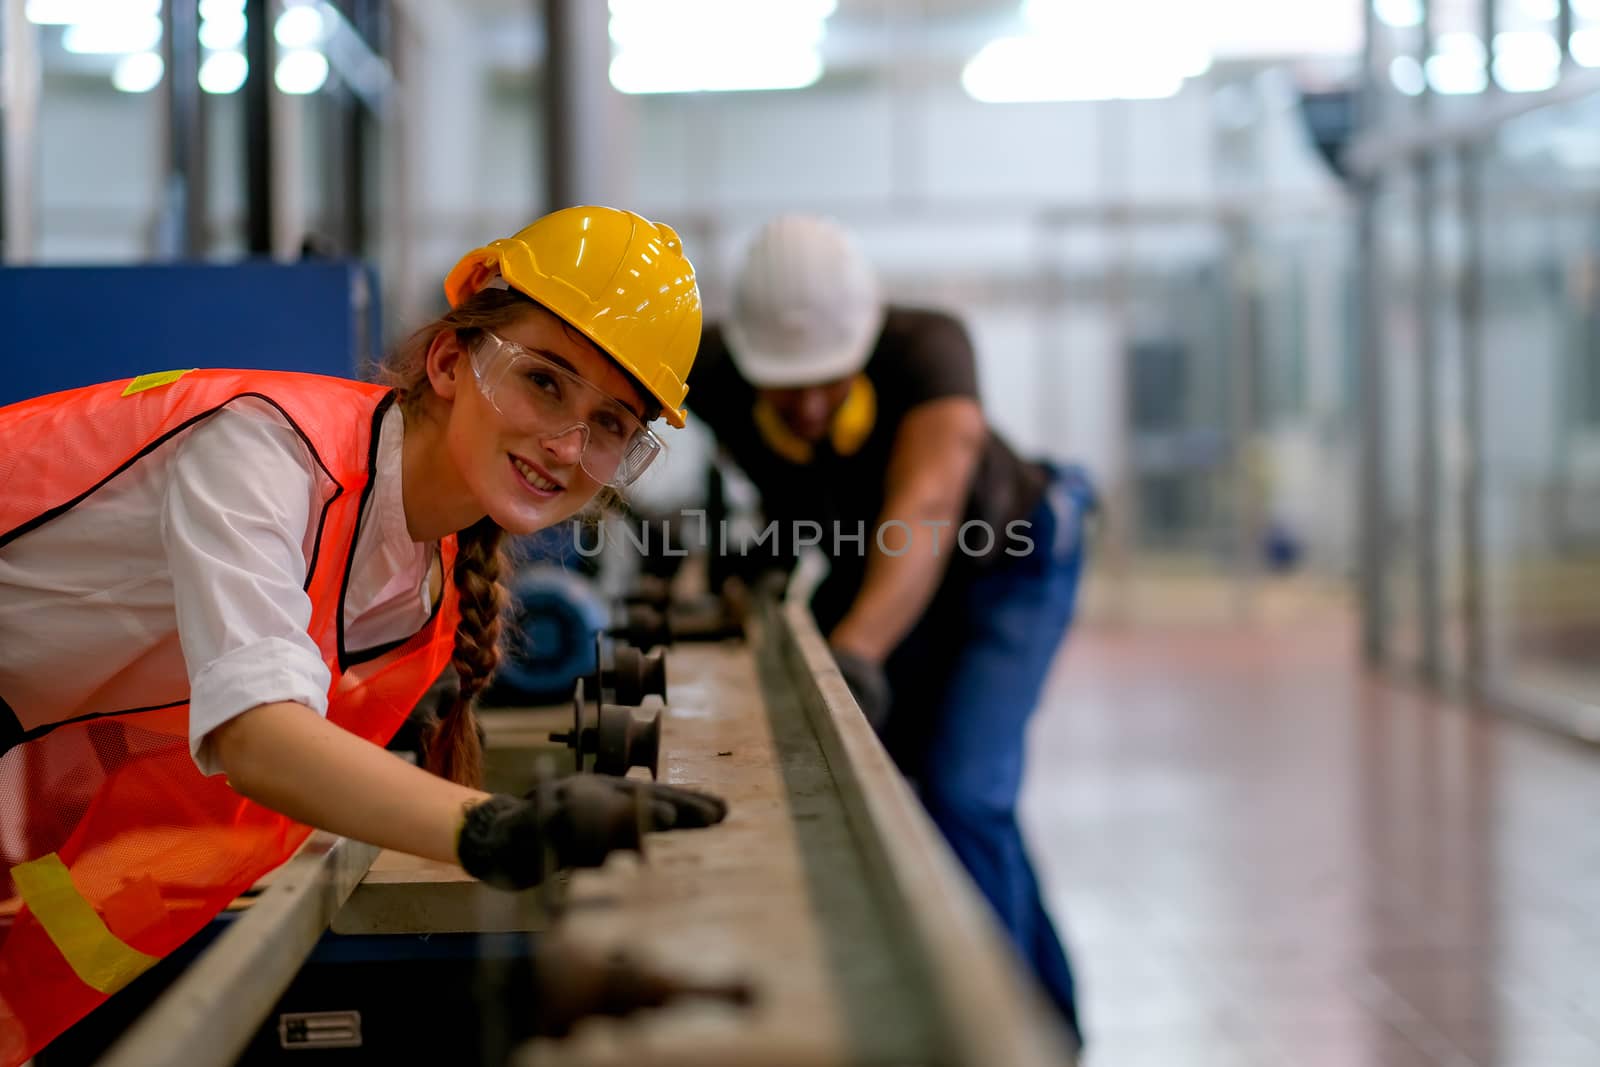 Beautiful worker or technician or engineer woman smile and look forward in front of rail of the machine with her co-worker as background in factory.